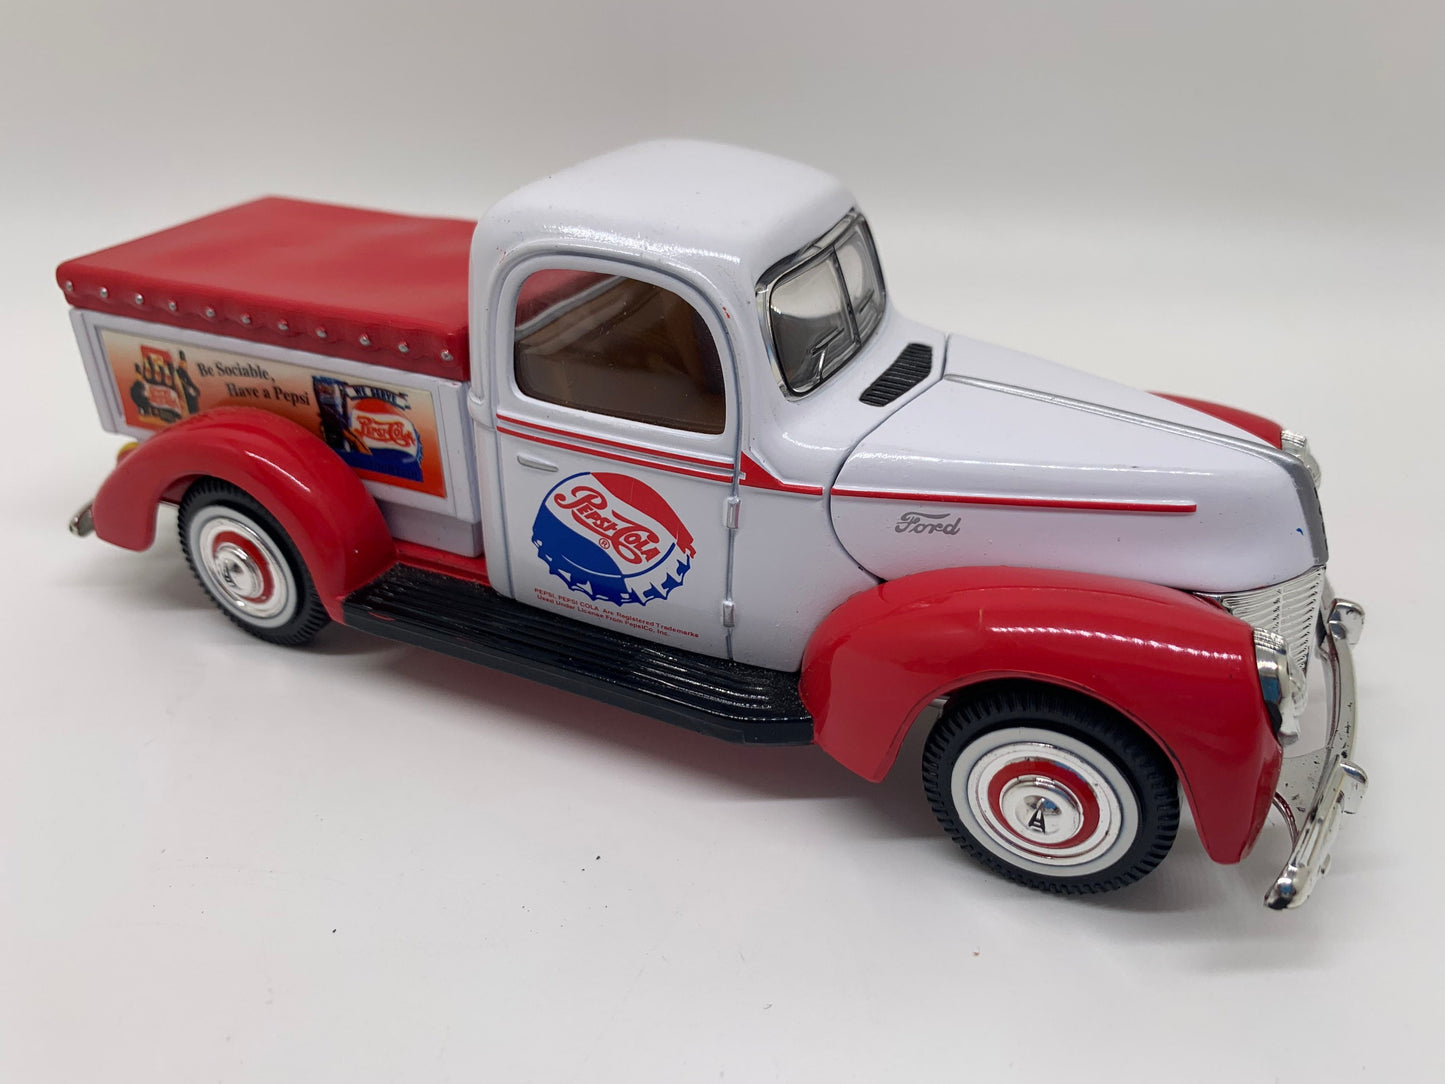 Ertl 1931 Hawkeye Truck Golden Wheel Ford-40 Delivery Truck Pepsi Cola Perfect Birthday Gift Collectible Scale Model Toy Car Pepsi Coin Bank